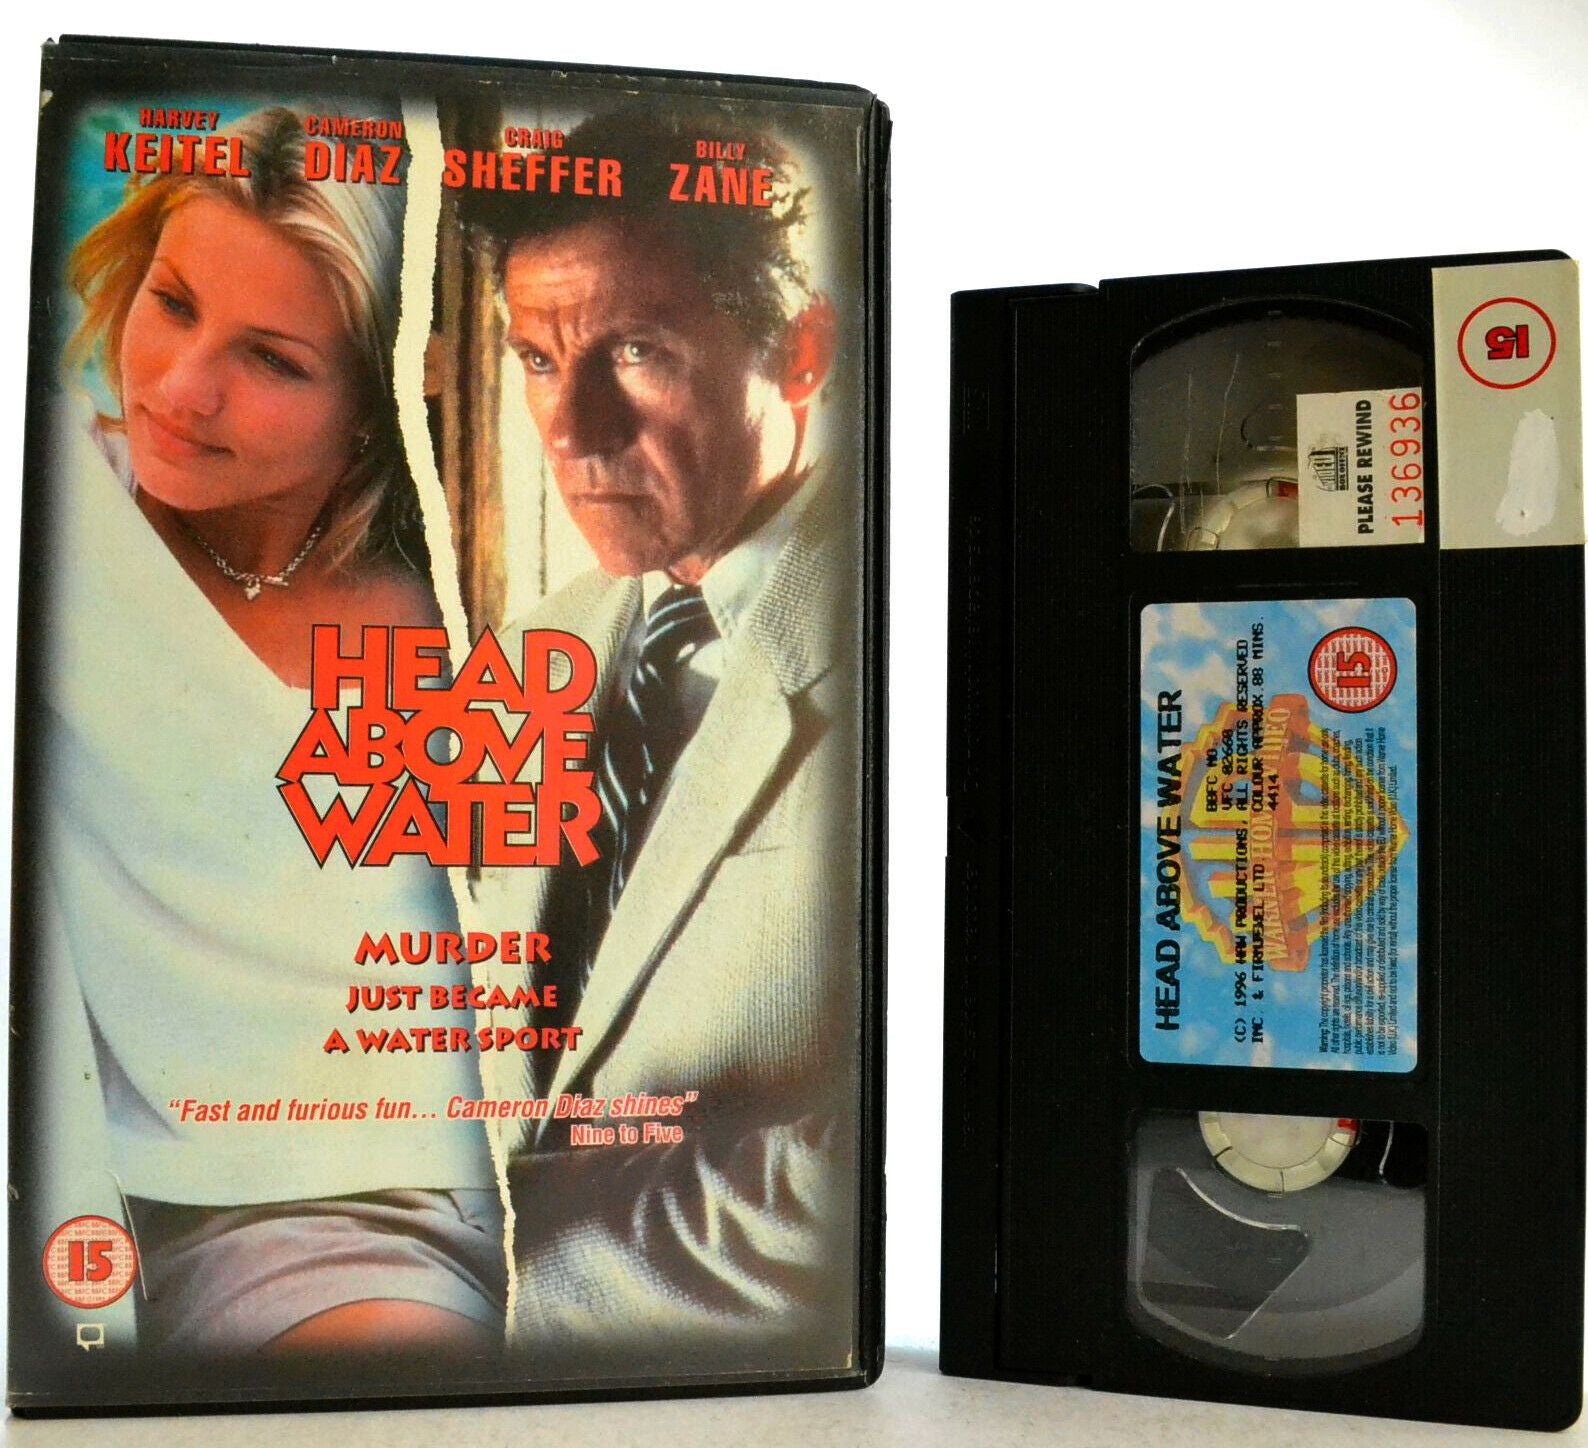 Head Above Water: H.Keitel/C.Diaz - Comedy Thriller (1996) - Large Box - Pal VHS-